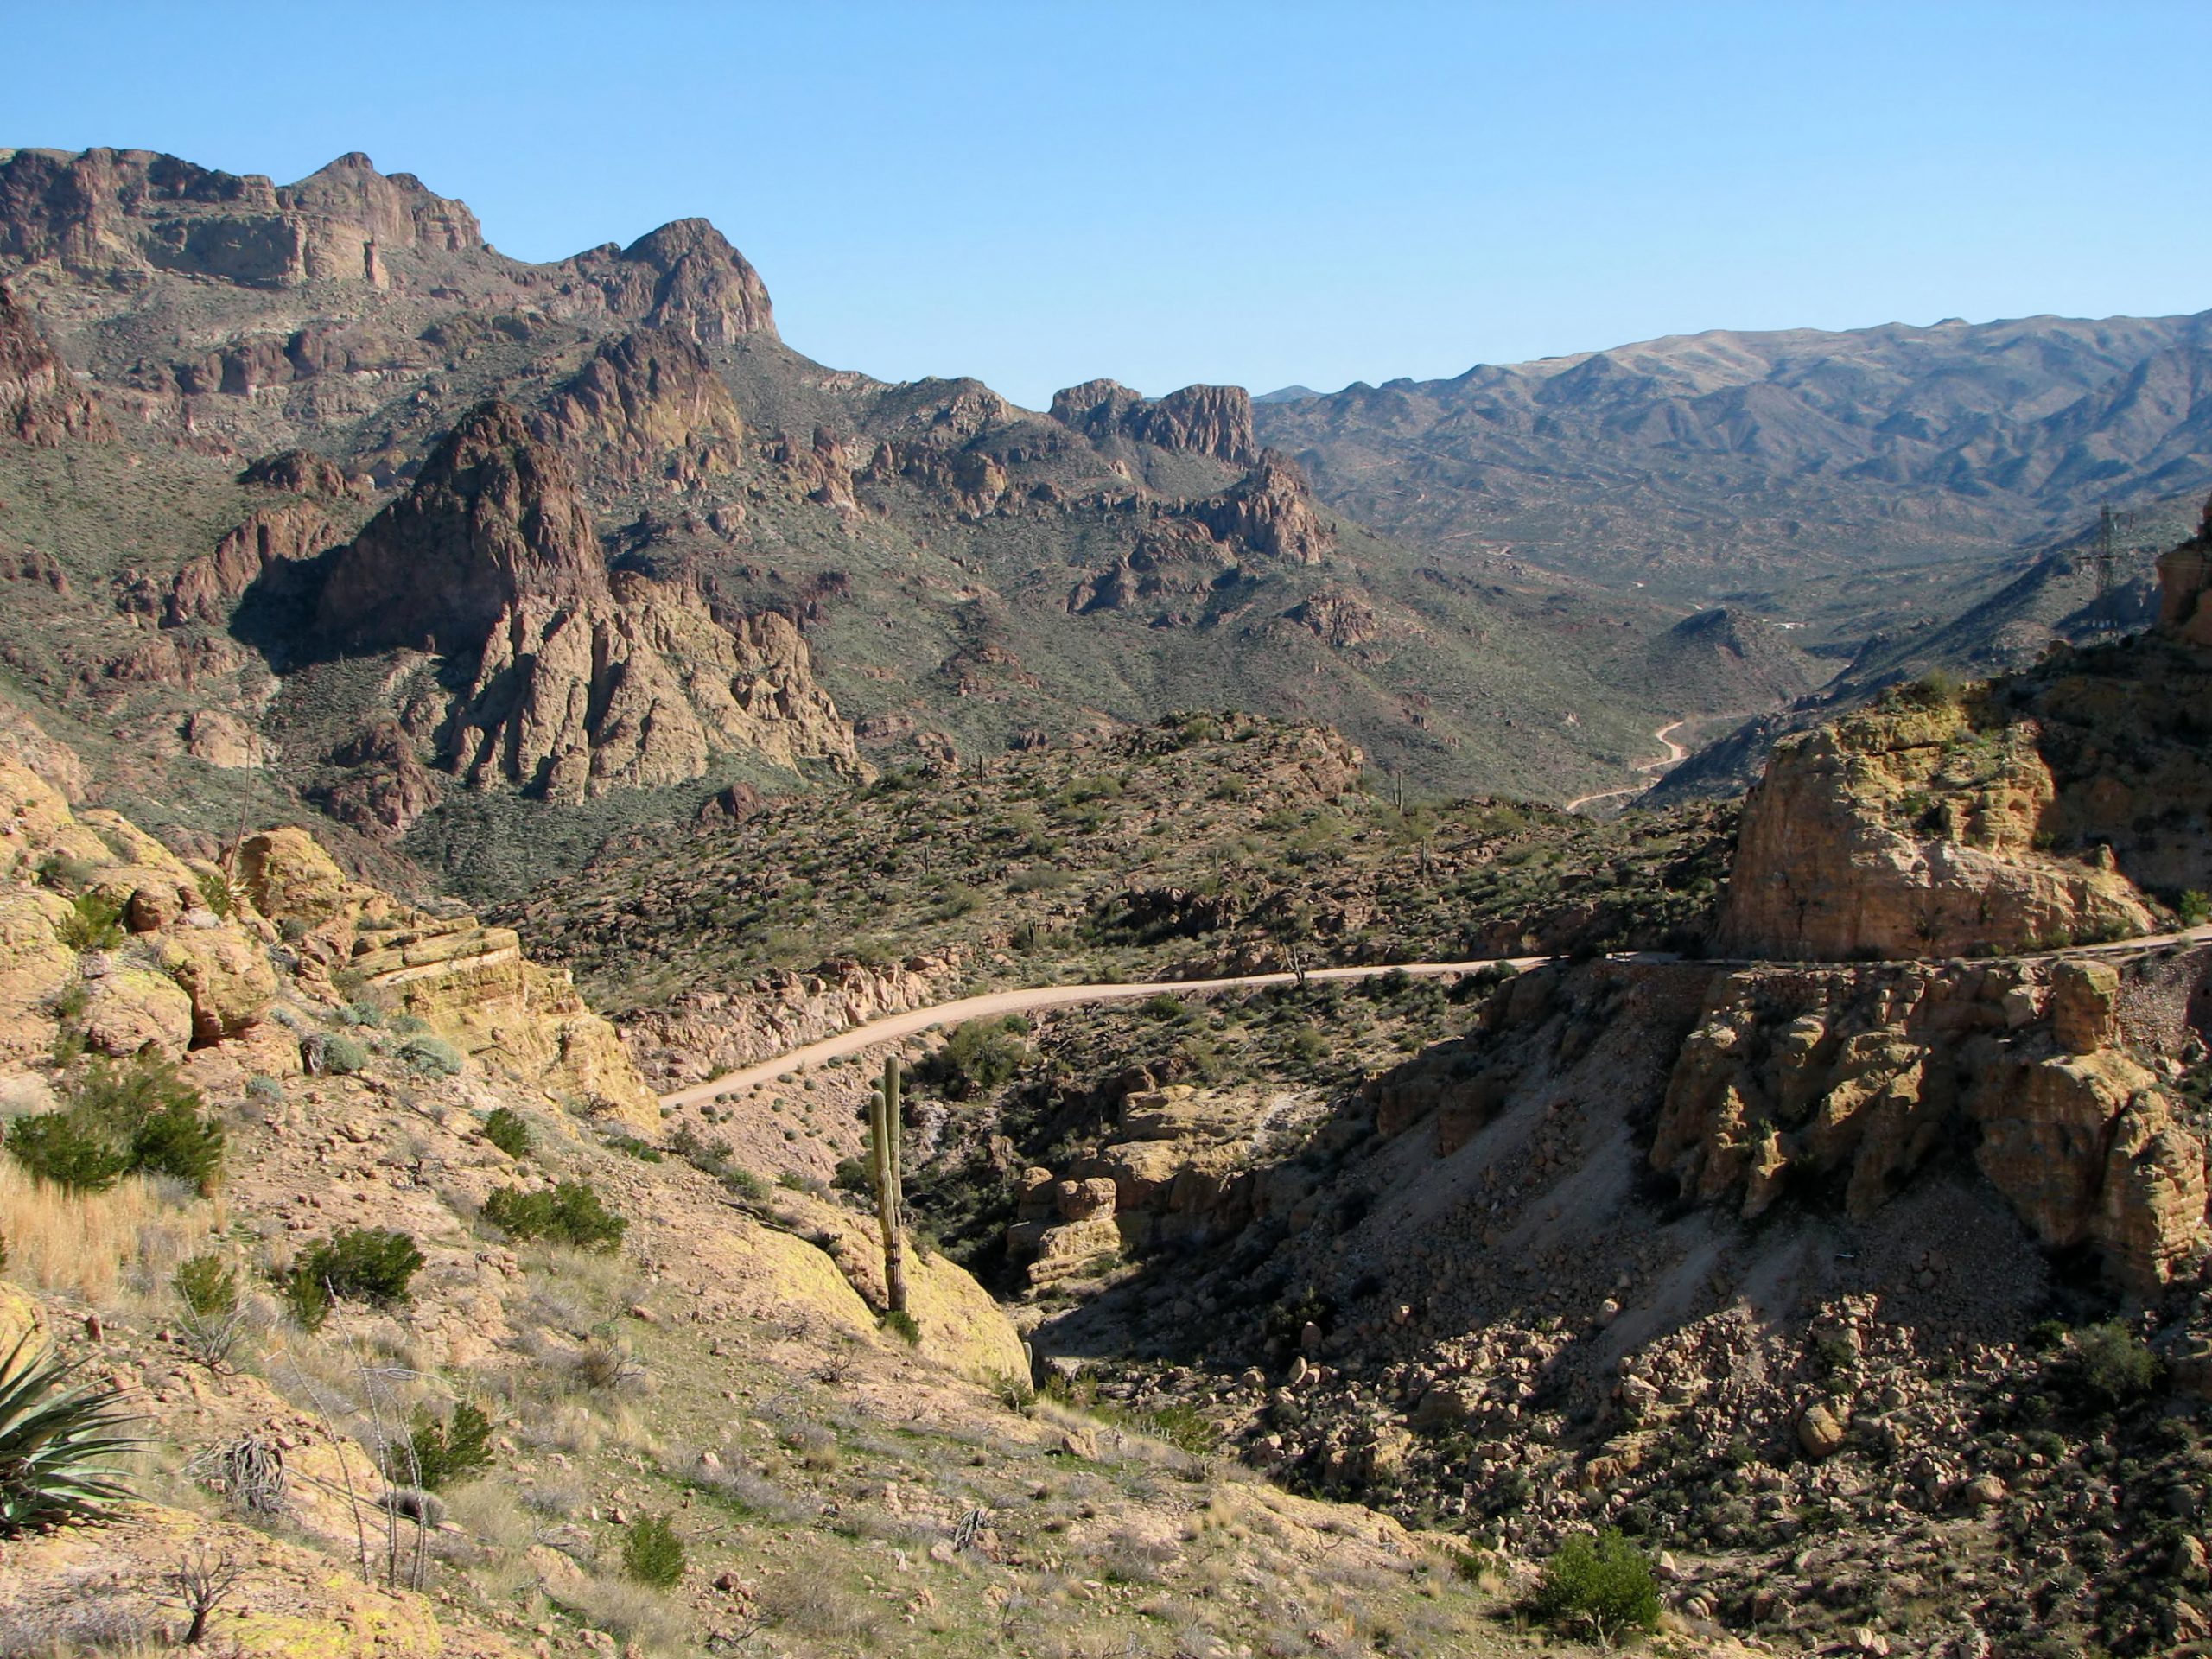 The Apache Trail is a popular route for reaching Roosevelt Lake